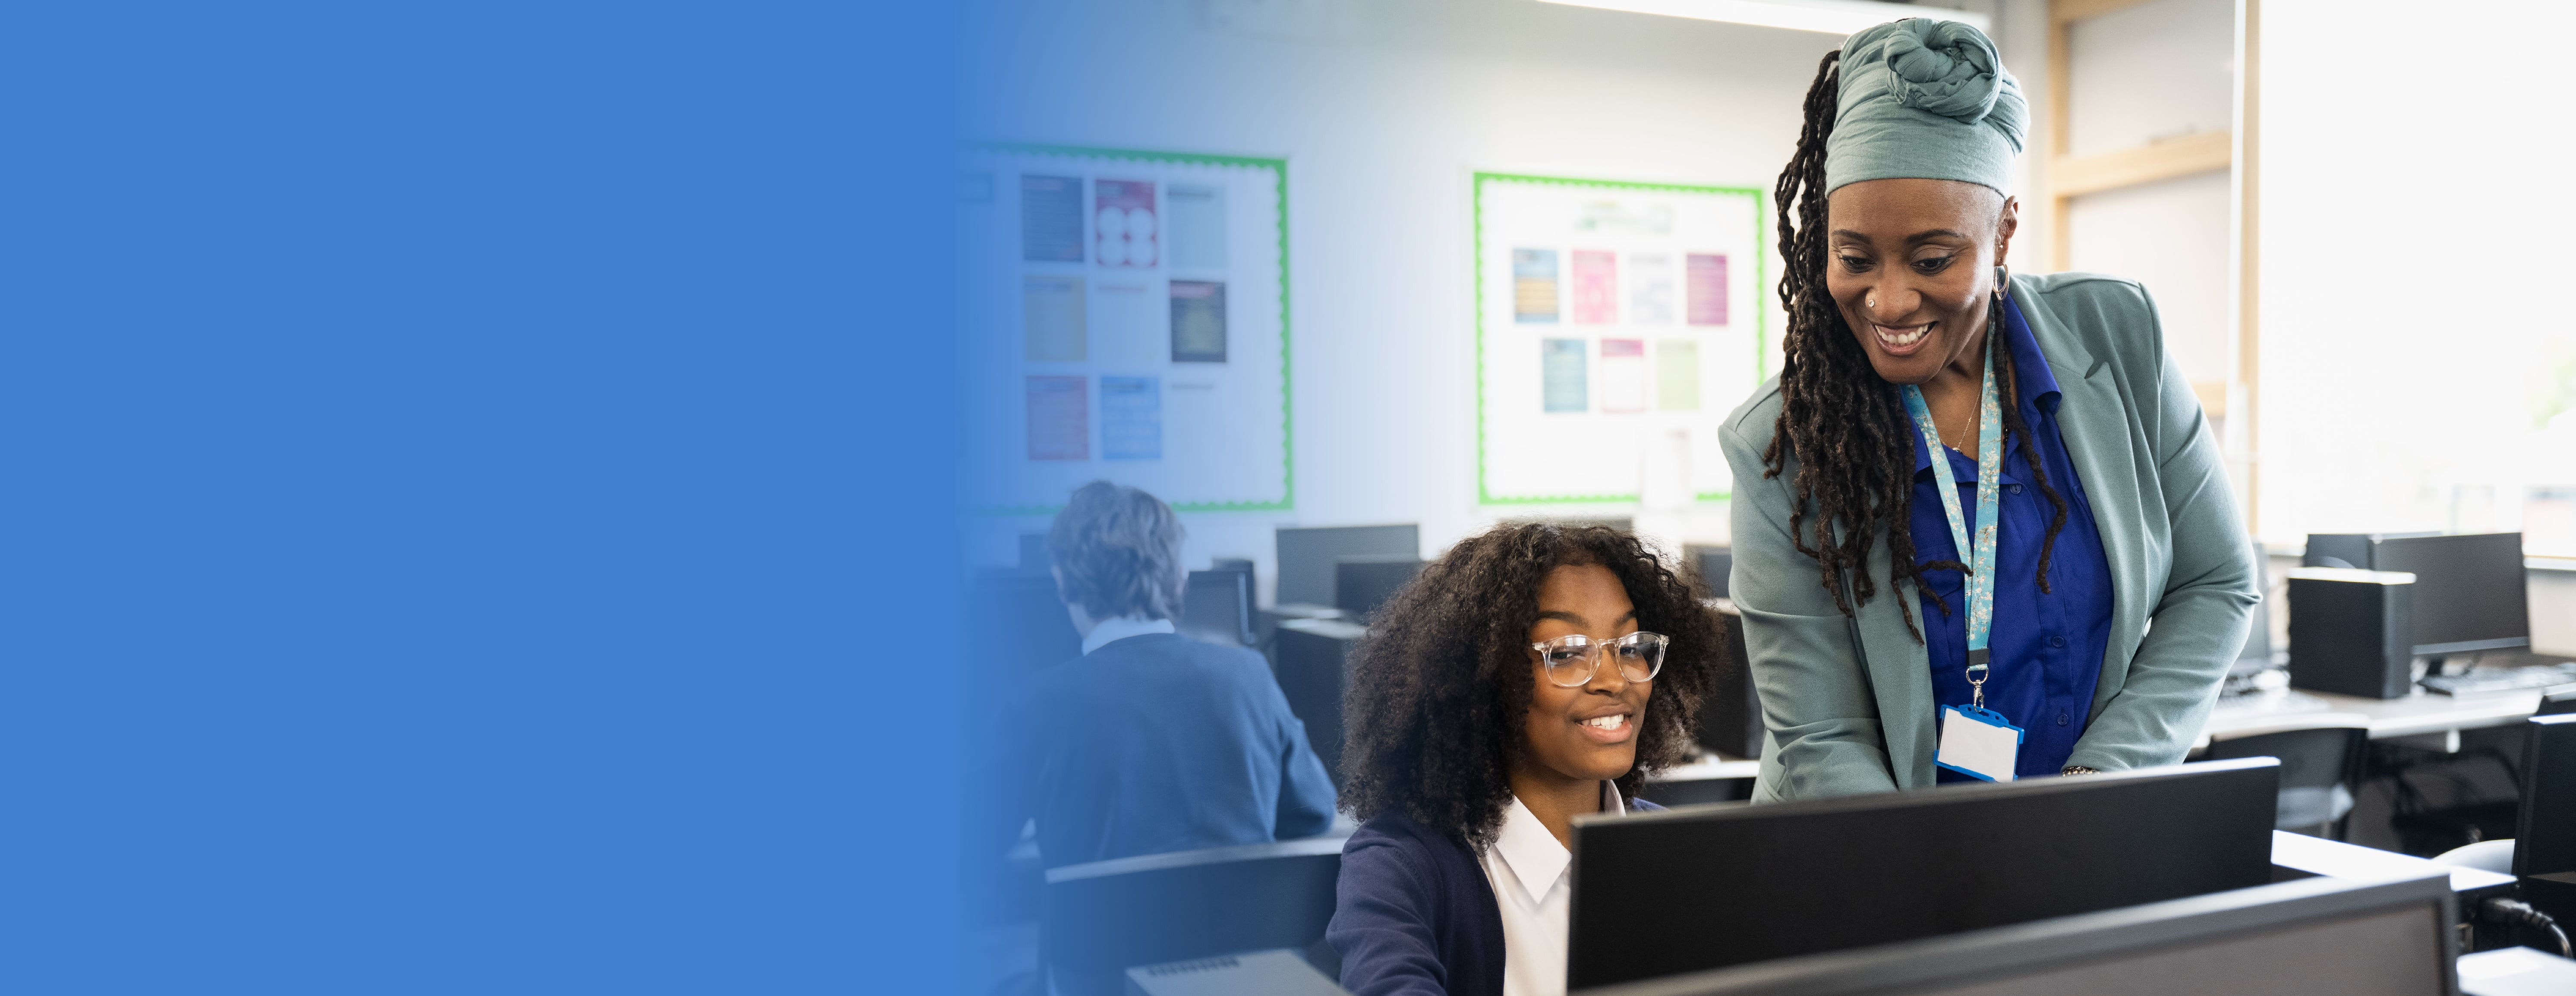 Staying Secure & Connected With Netmatters - Urban Mission School IT Case Study